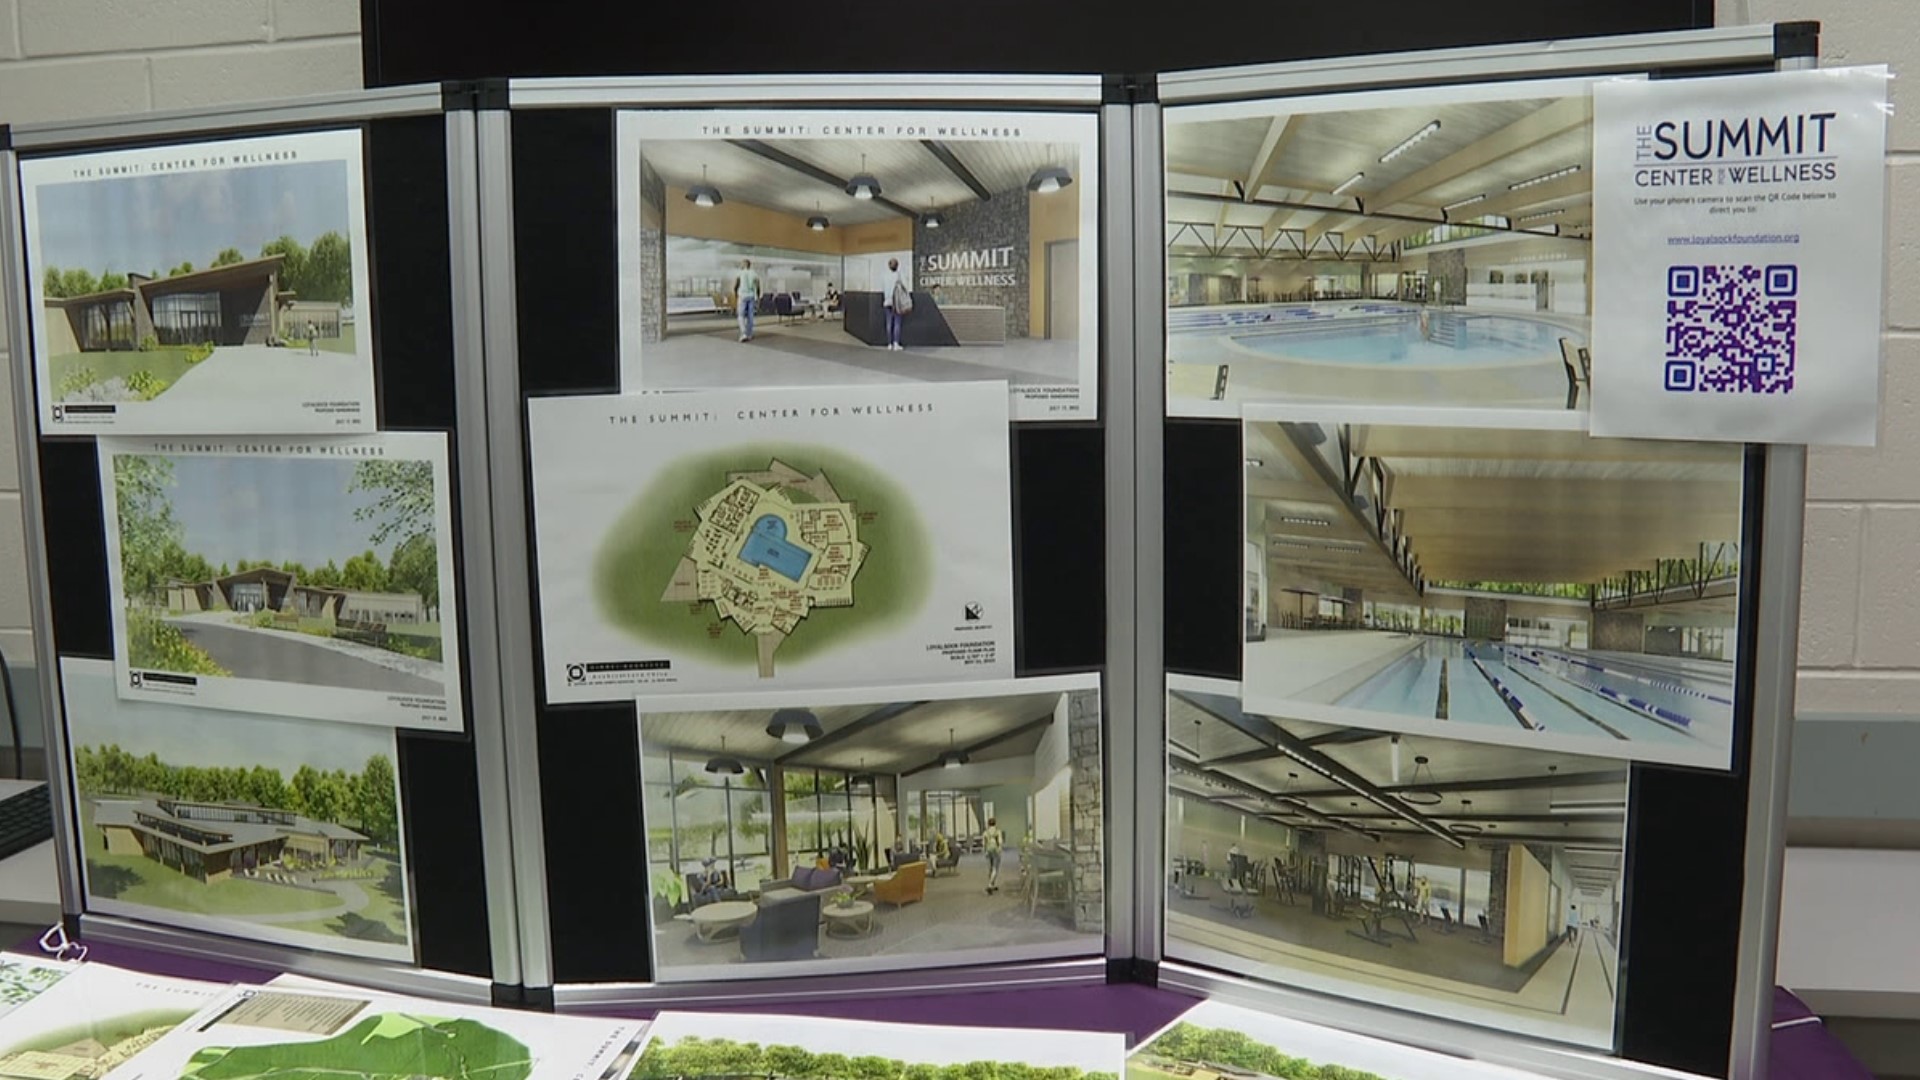 It's a massive project for our area's least populated county. Plans are in the works for a $30 million wellness center in Sullivan County.